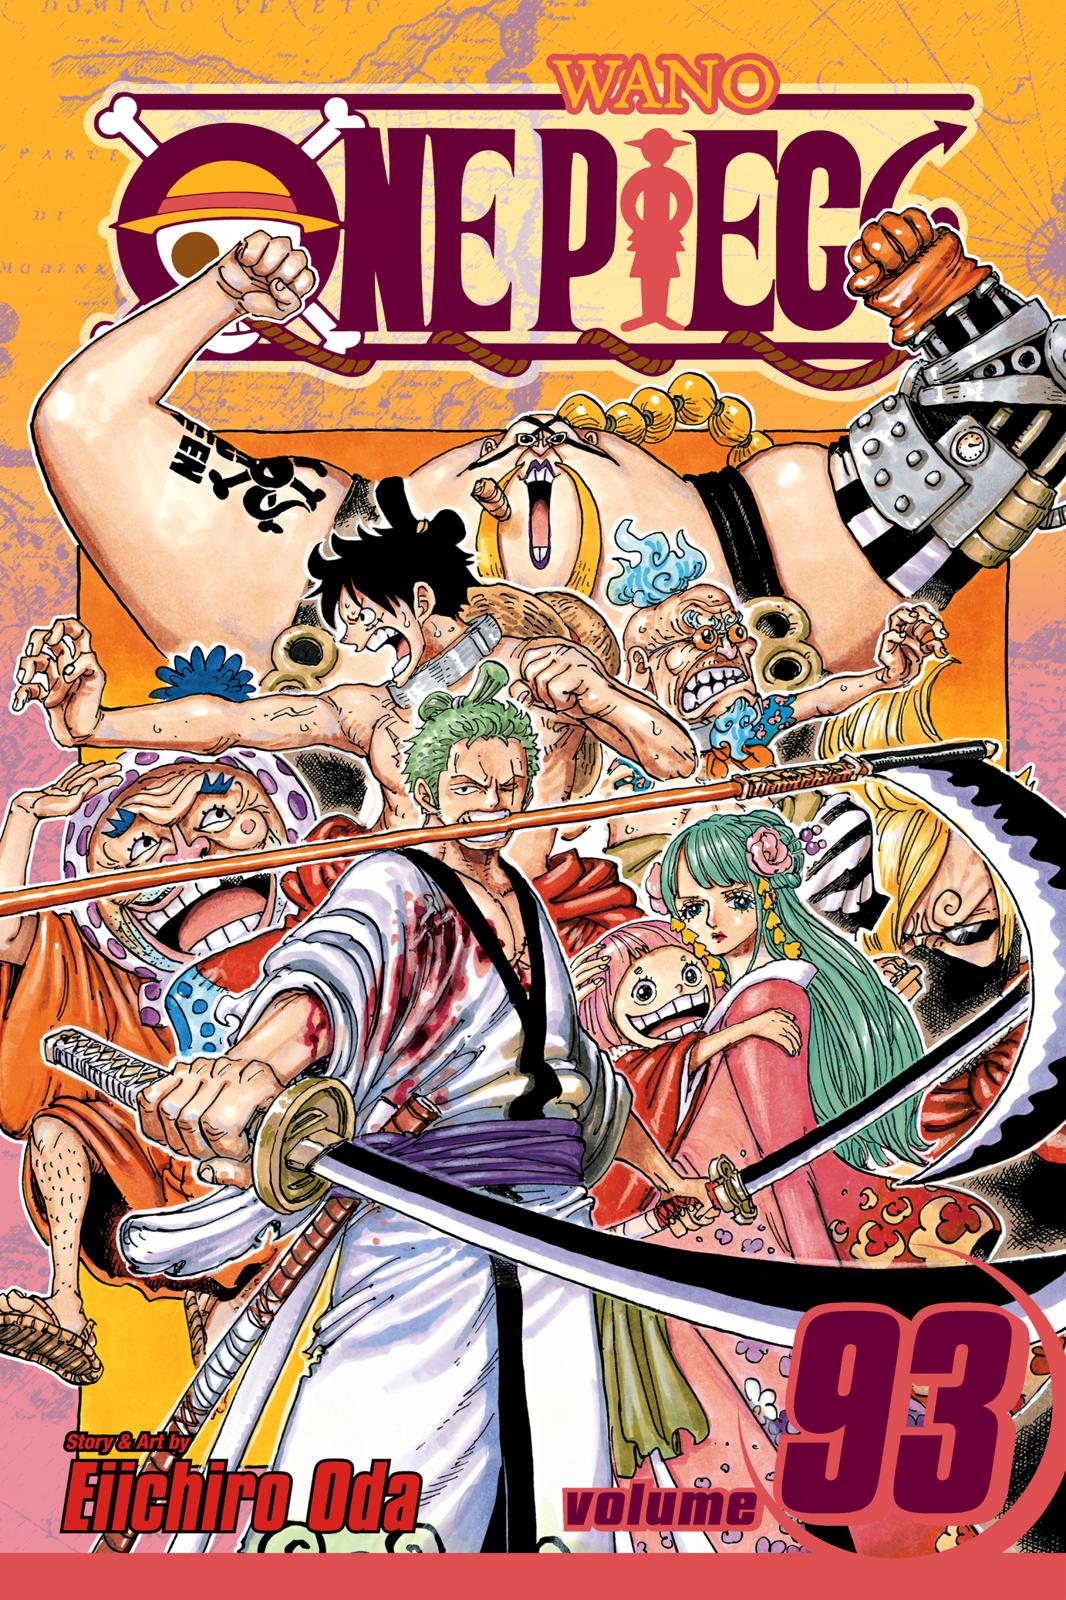 One Piece, Chapter 932 image 001